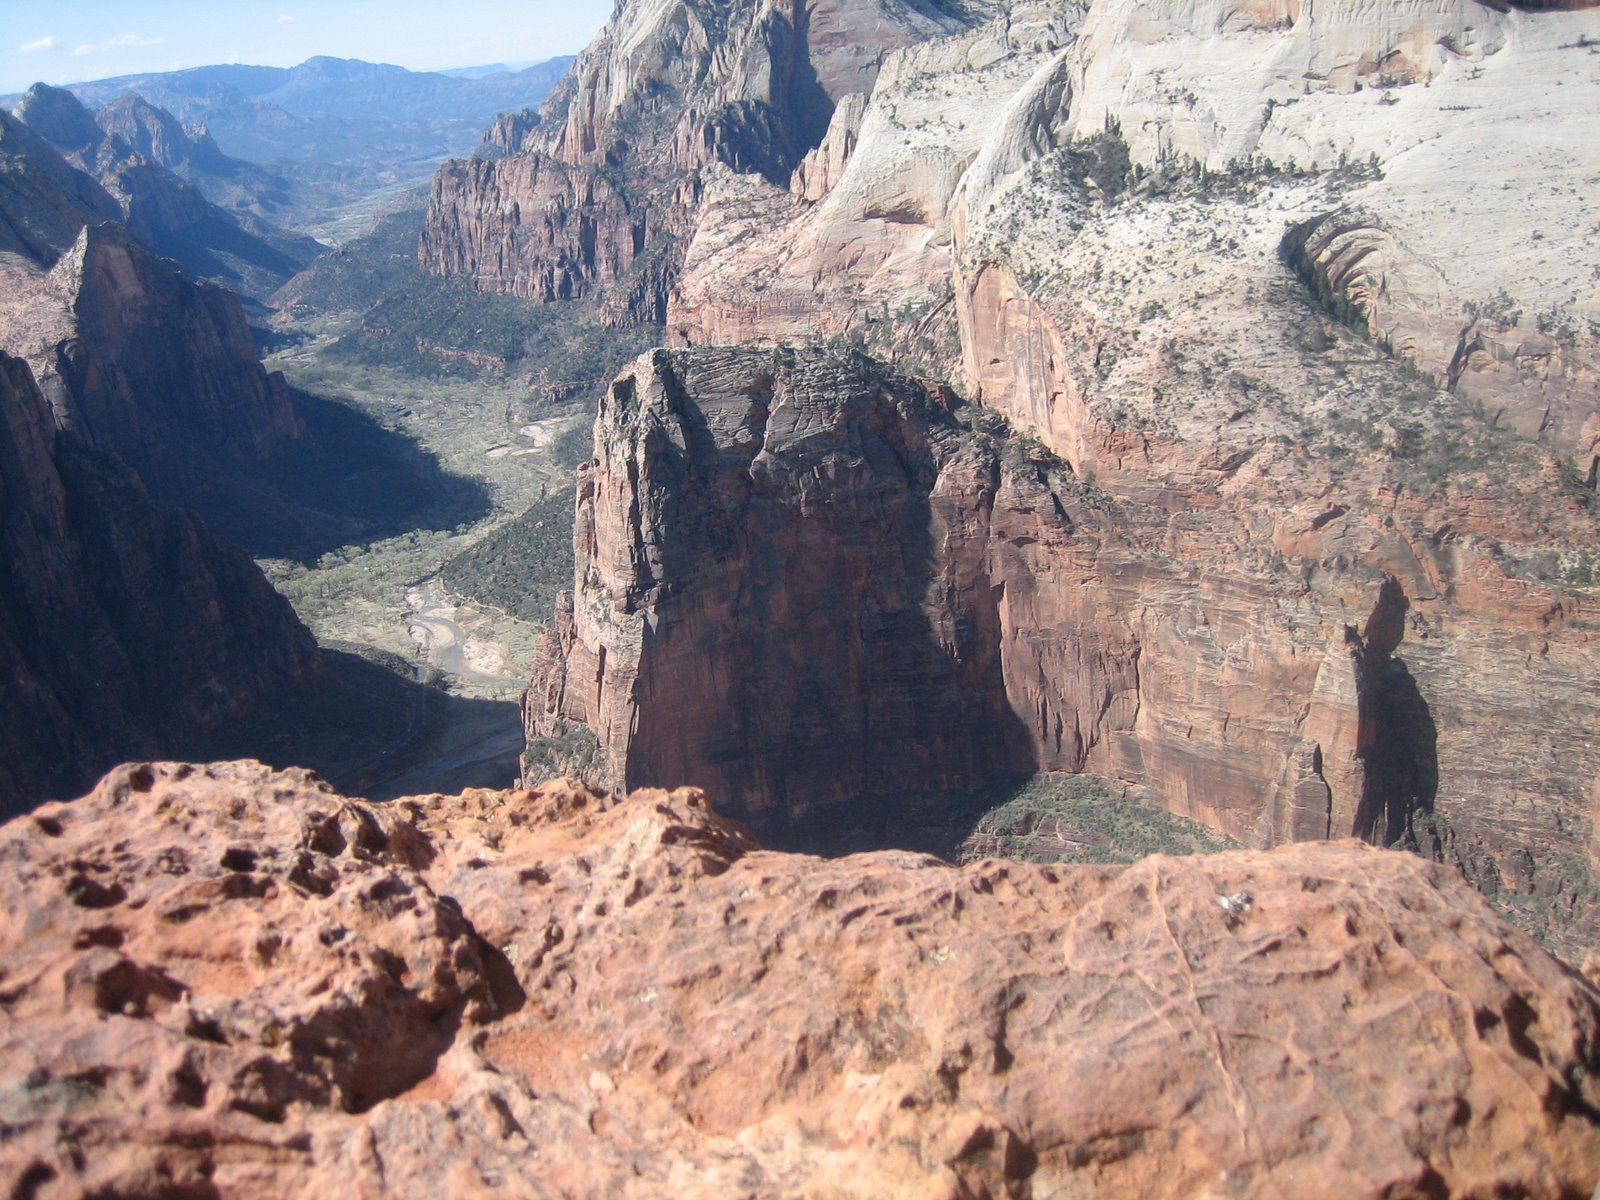 Picture from Observation Point in Zion National Park.